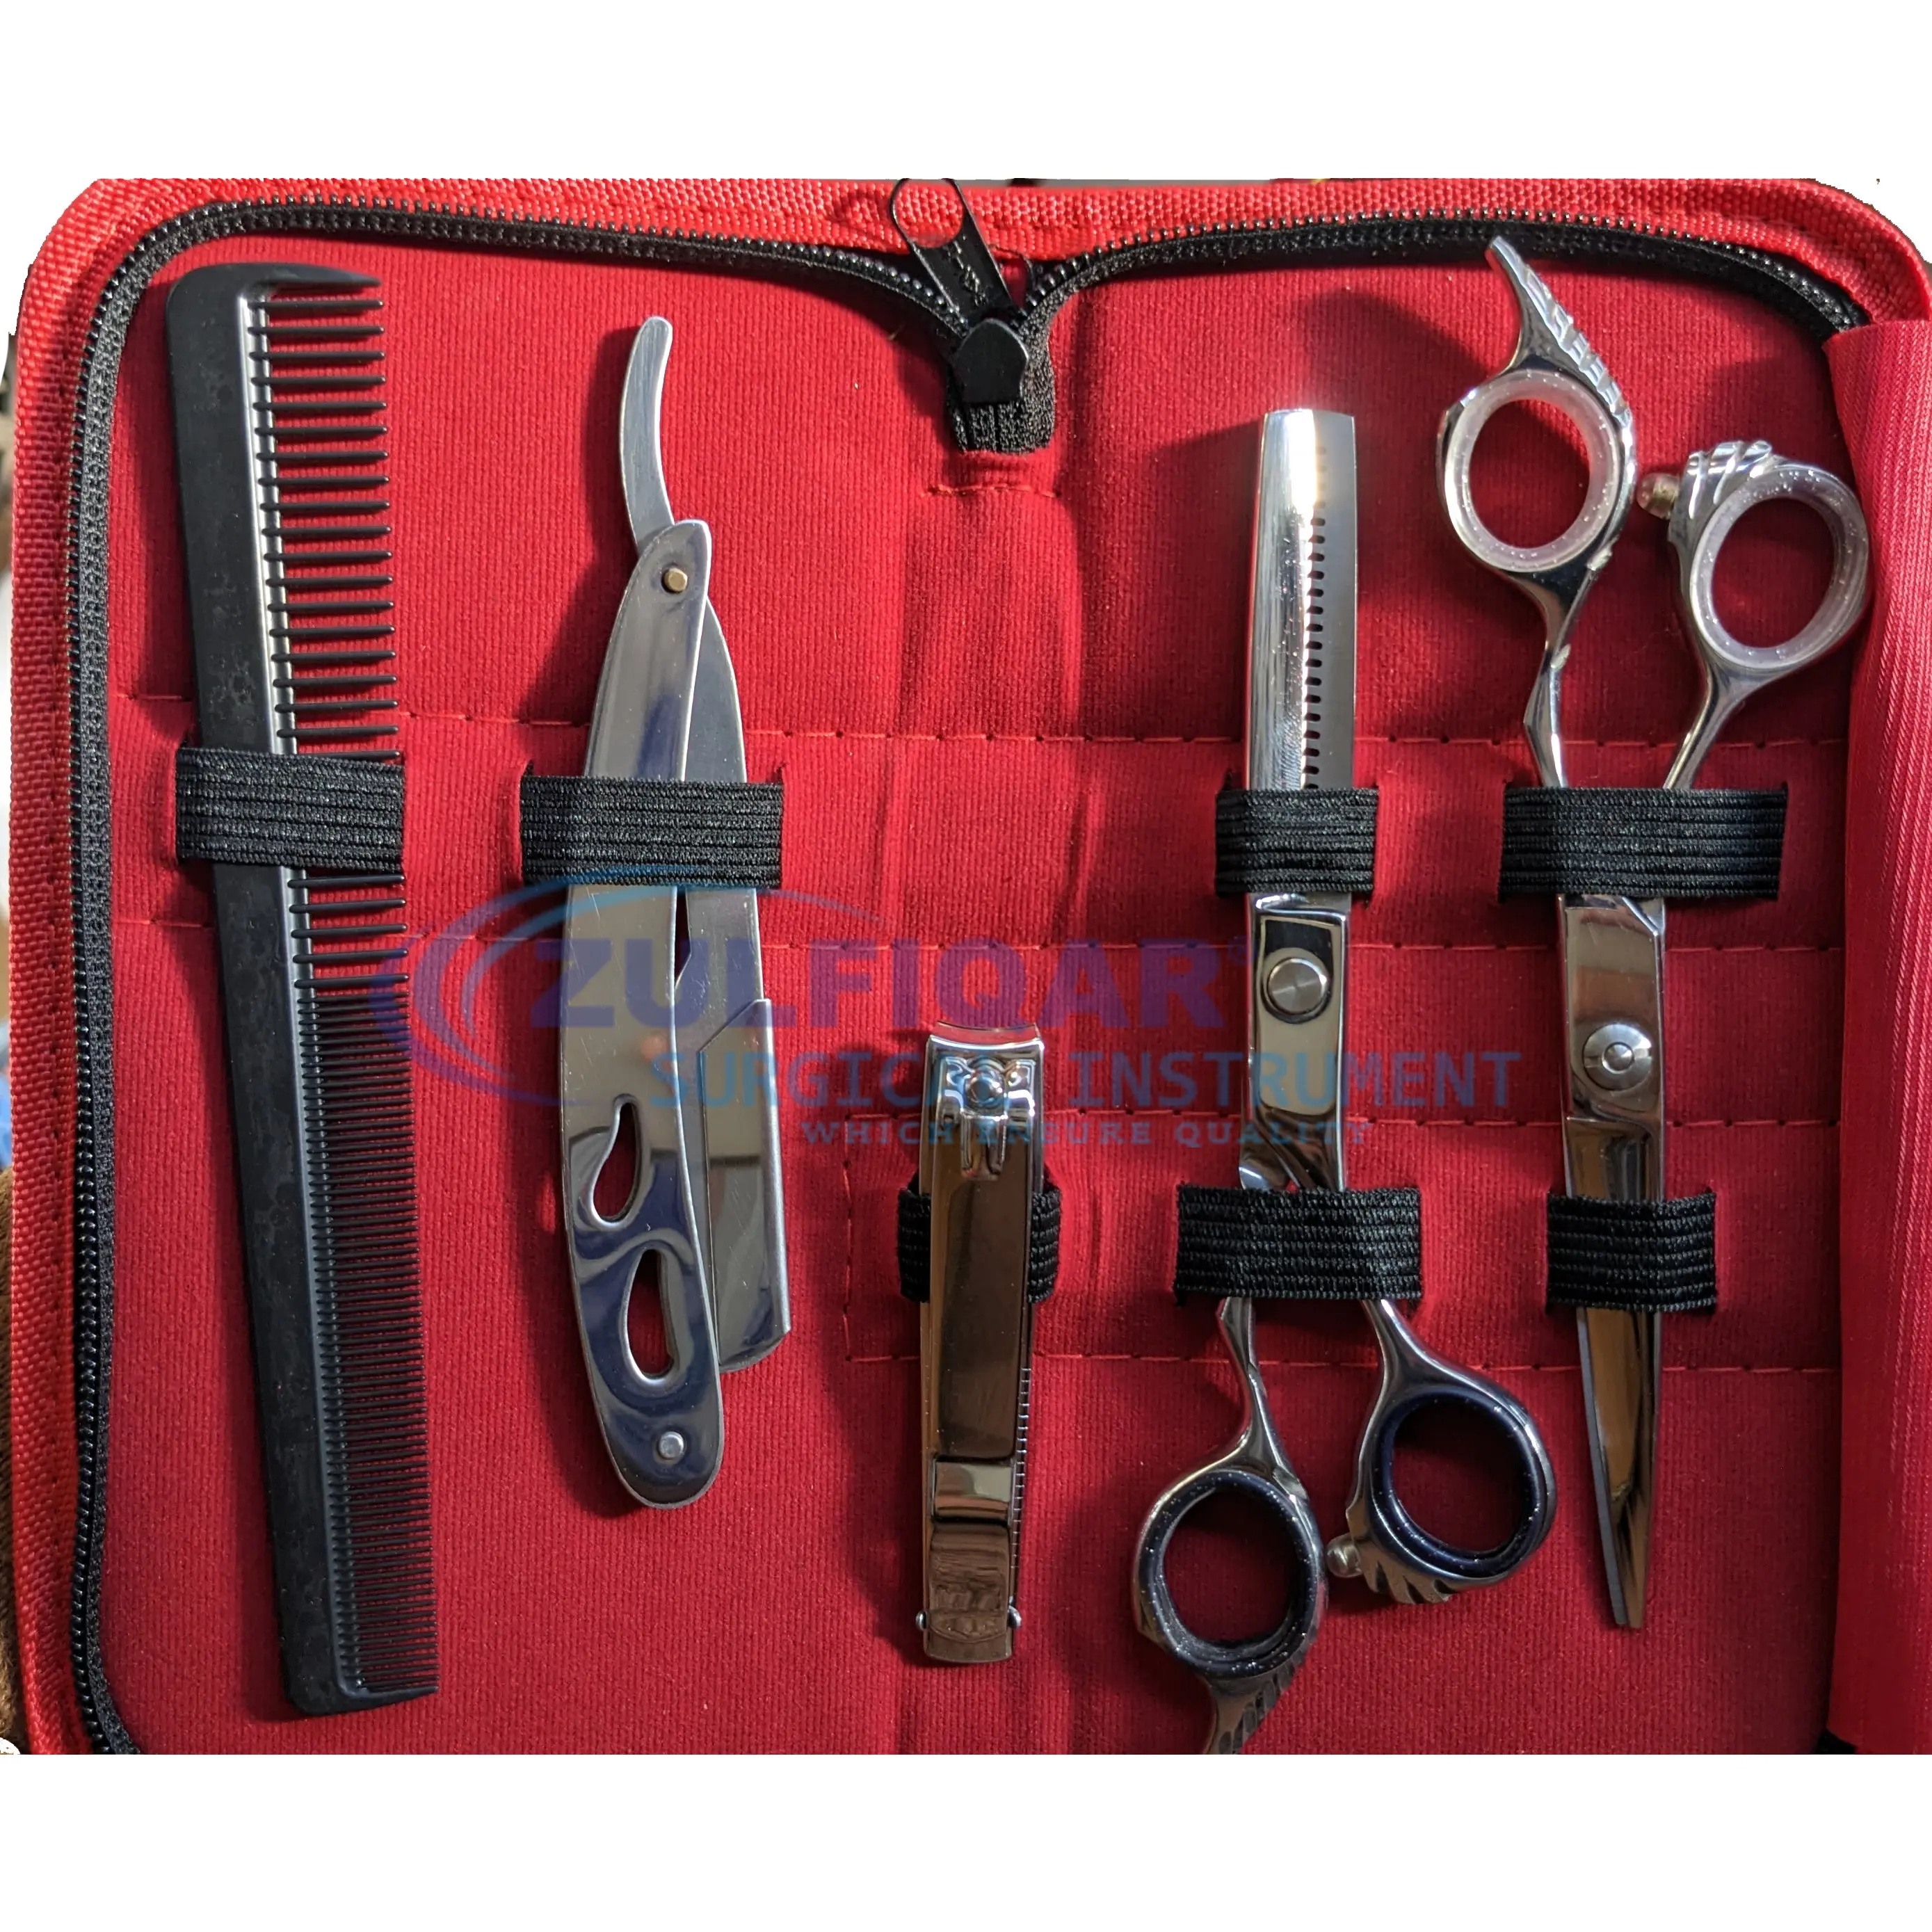 Basic Barbar set razer scissor and nail clipper and cutter Japanese Steel top class products with pouch